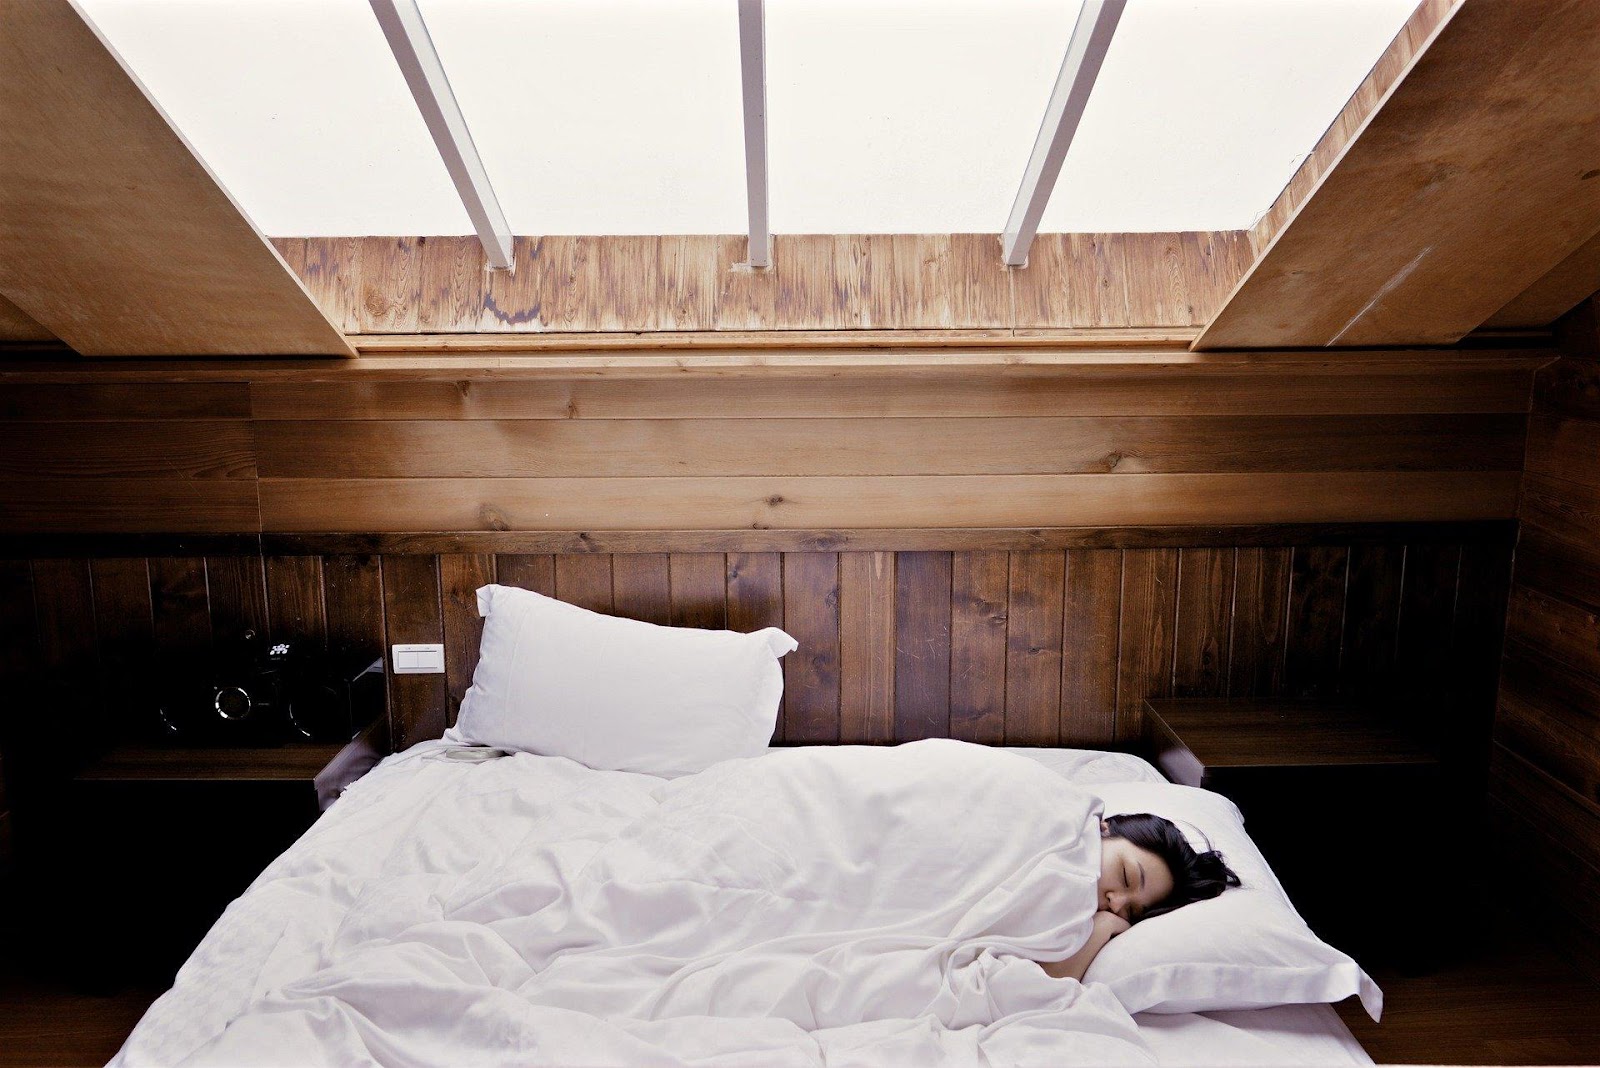 woman sleeping in a wooden room